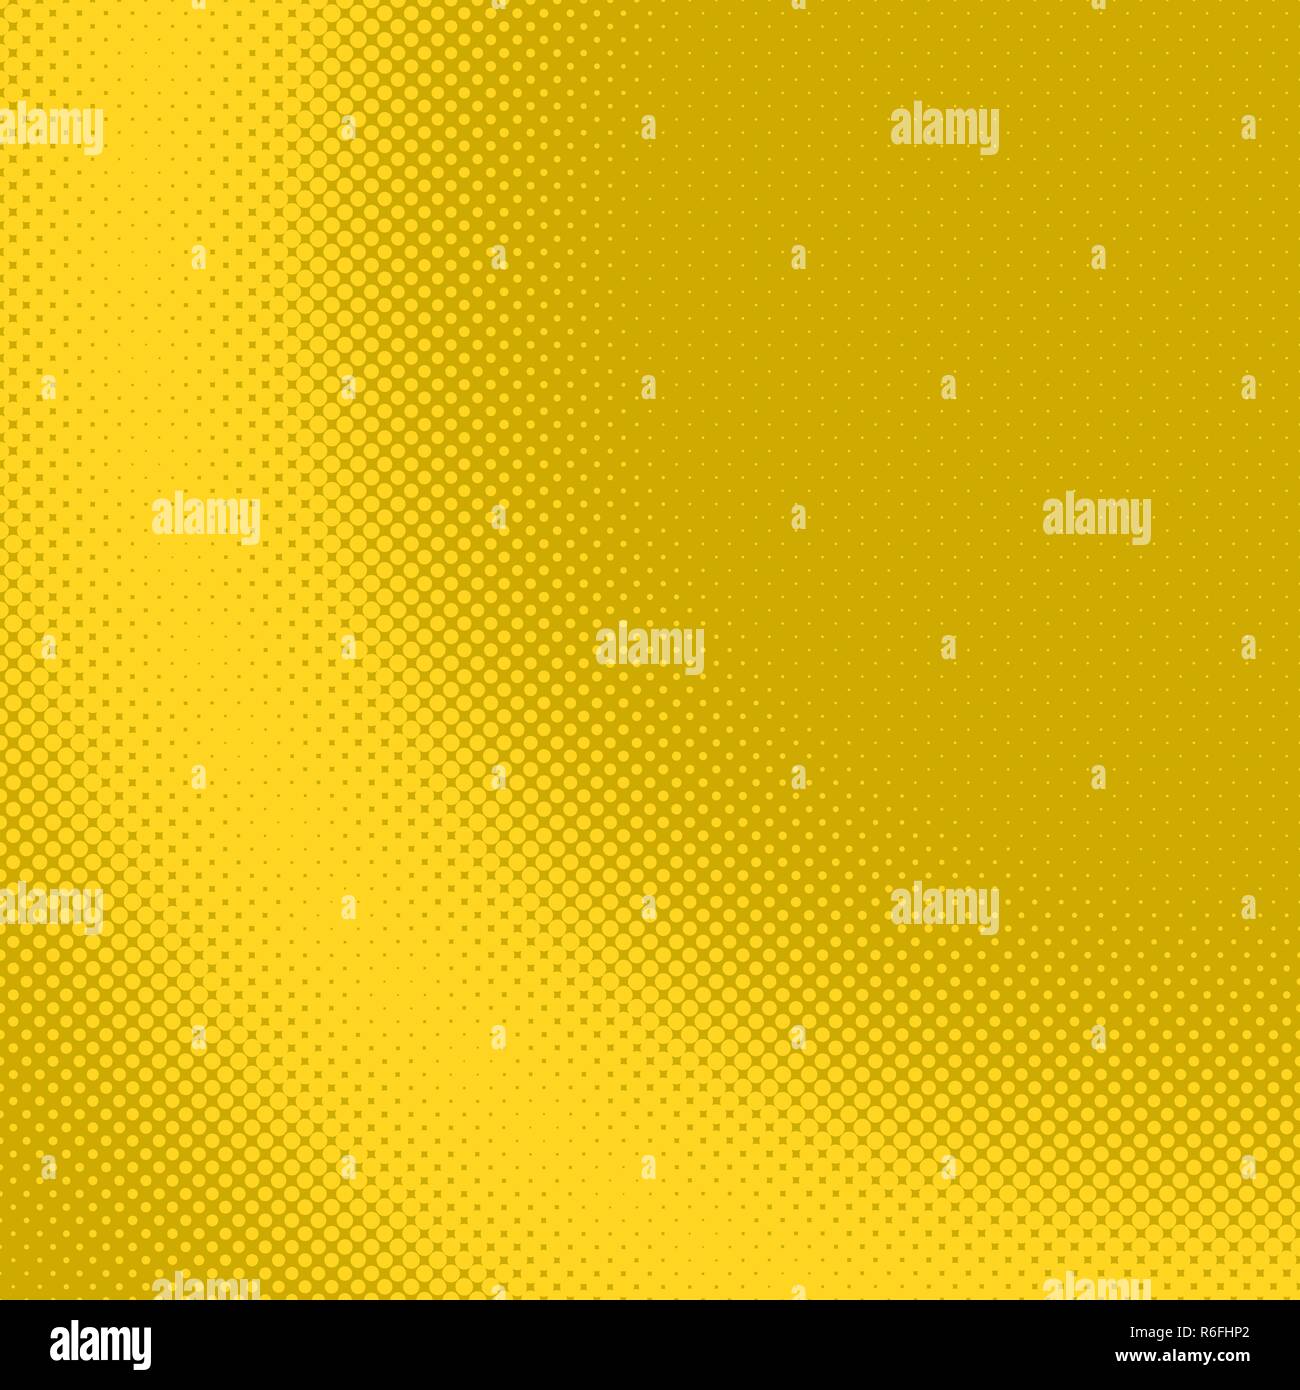 Yellow geometric abstract halftone dot pattern background - vector graphic Stock Vector